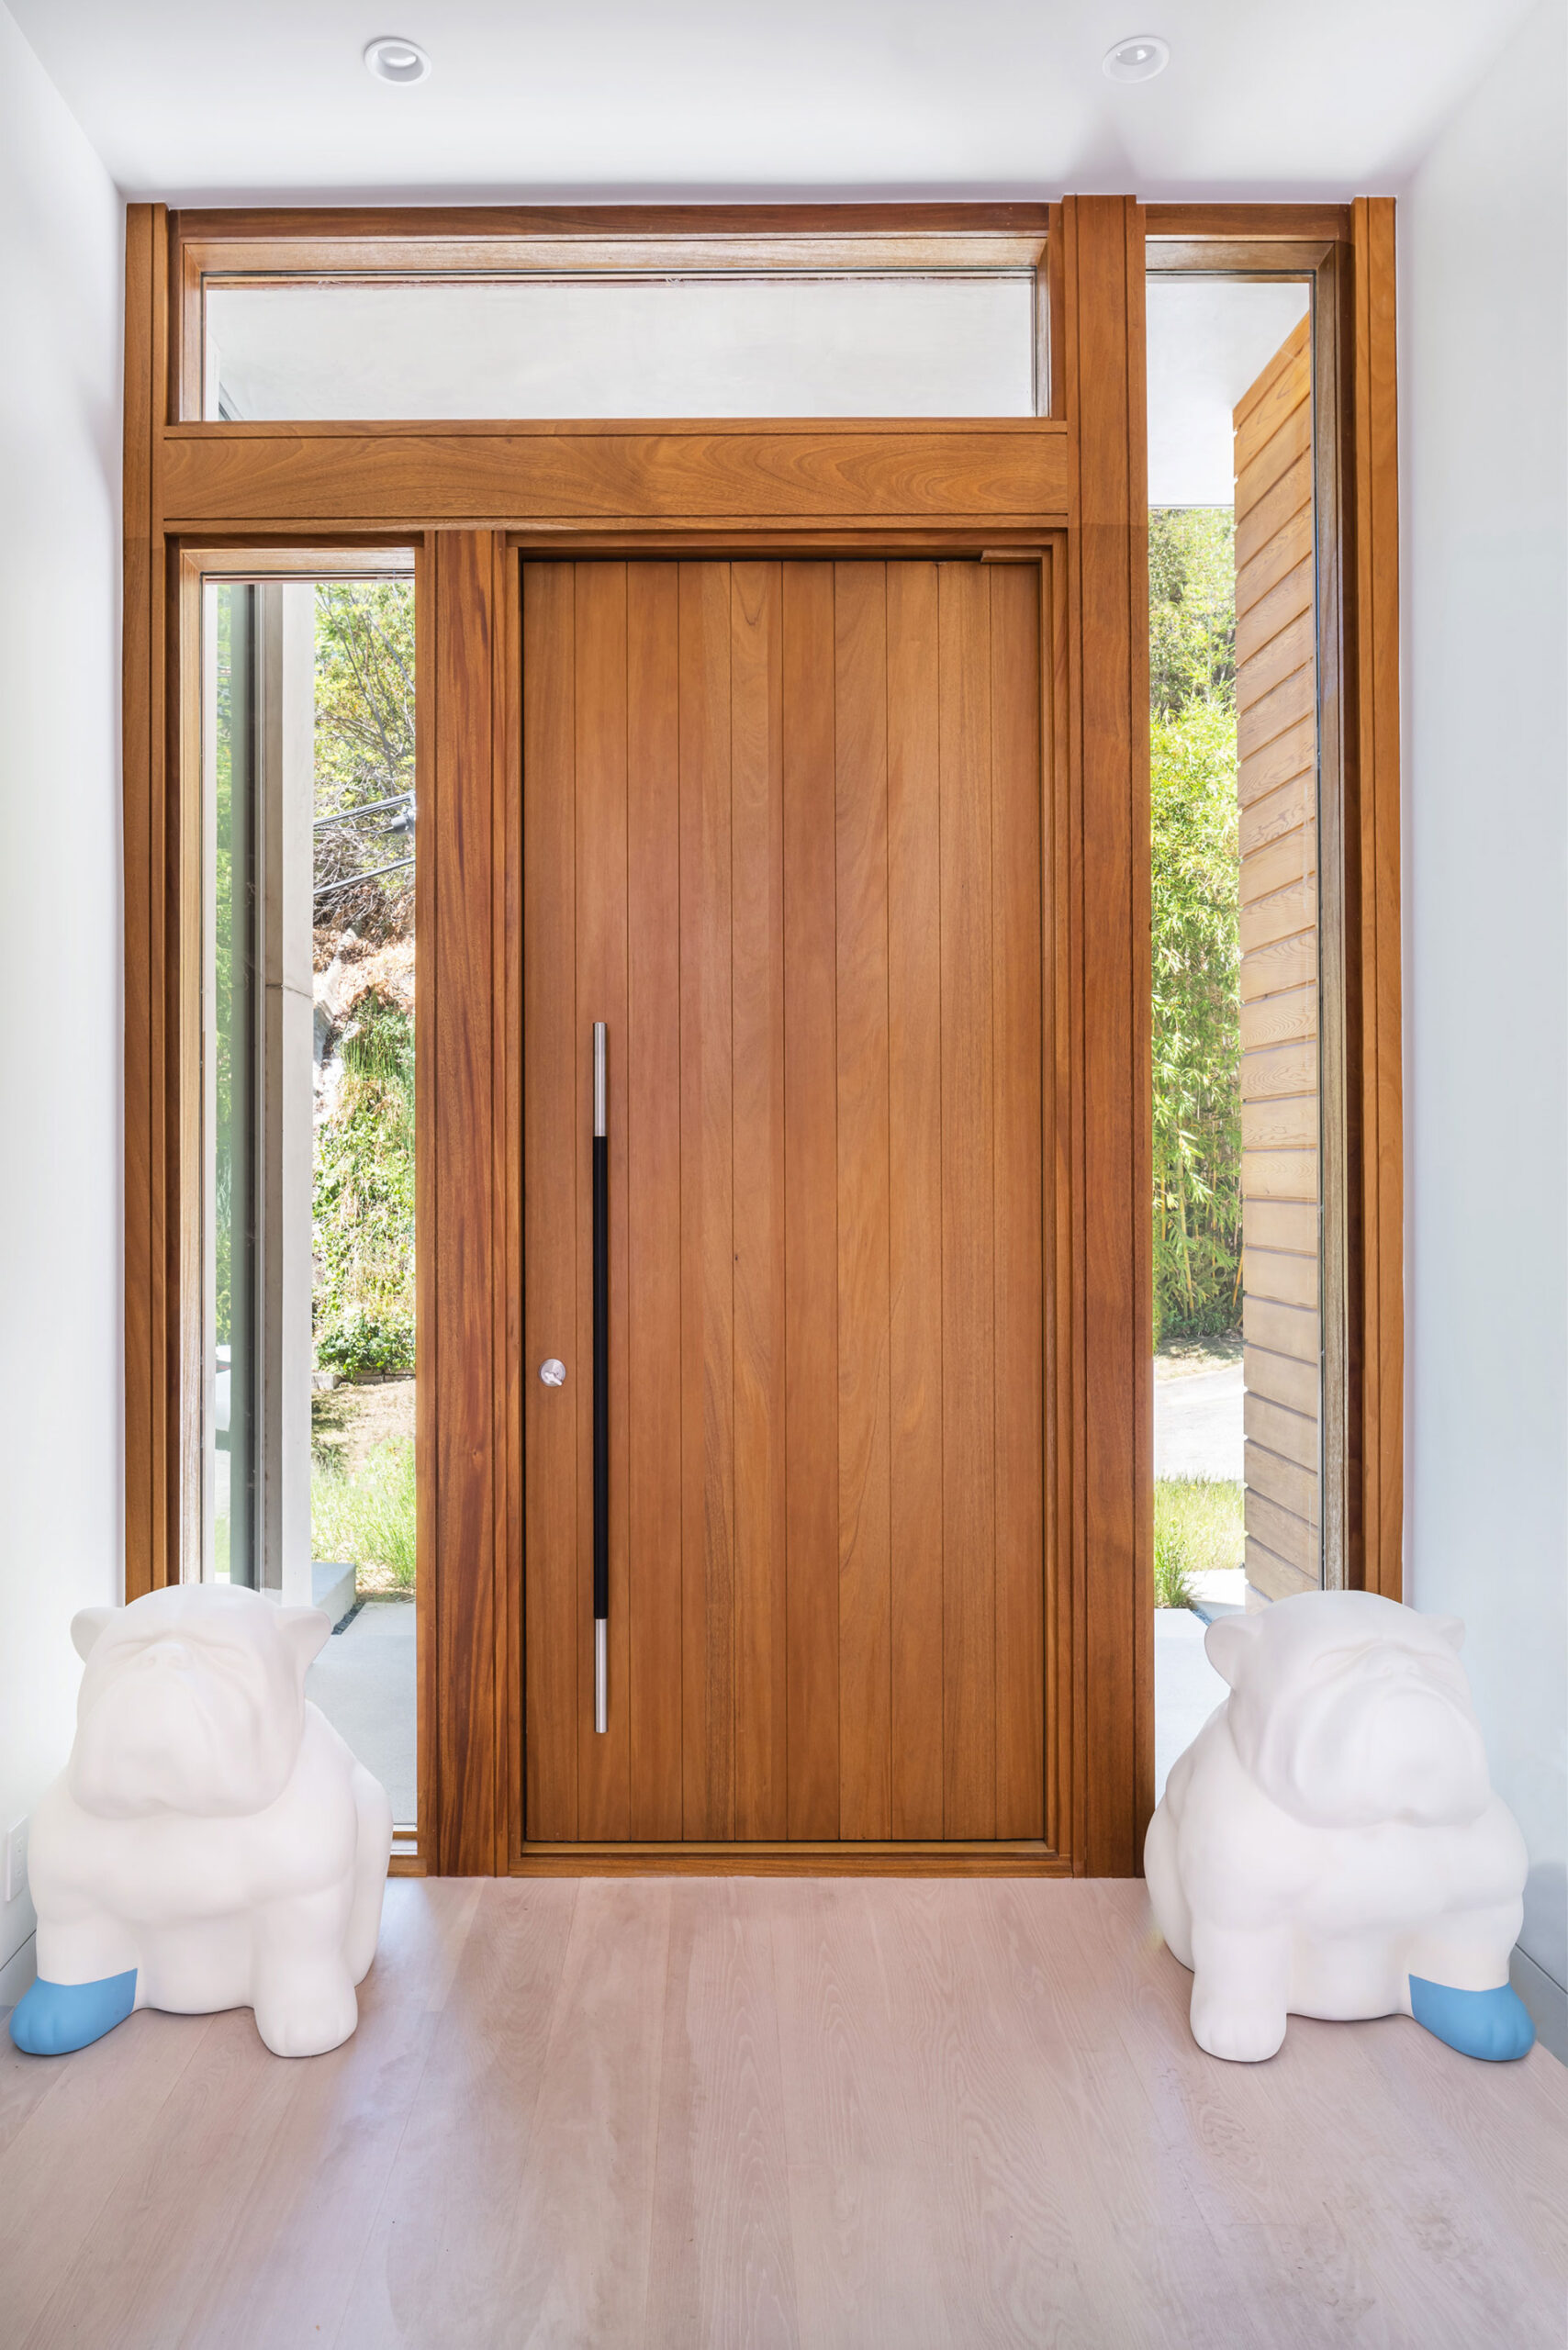 Custom mahogany front door and entrance. Photo: © Paul Vu, Here and Now Agency